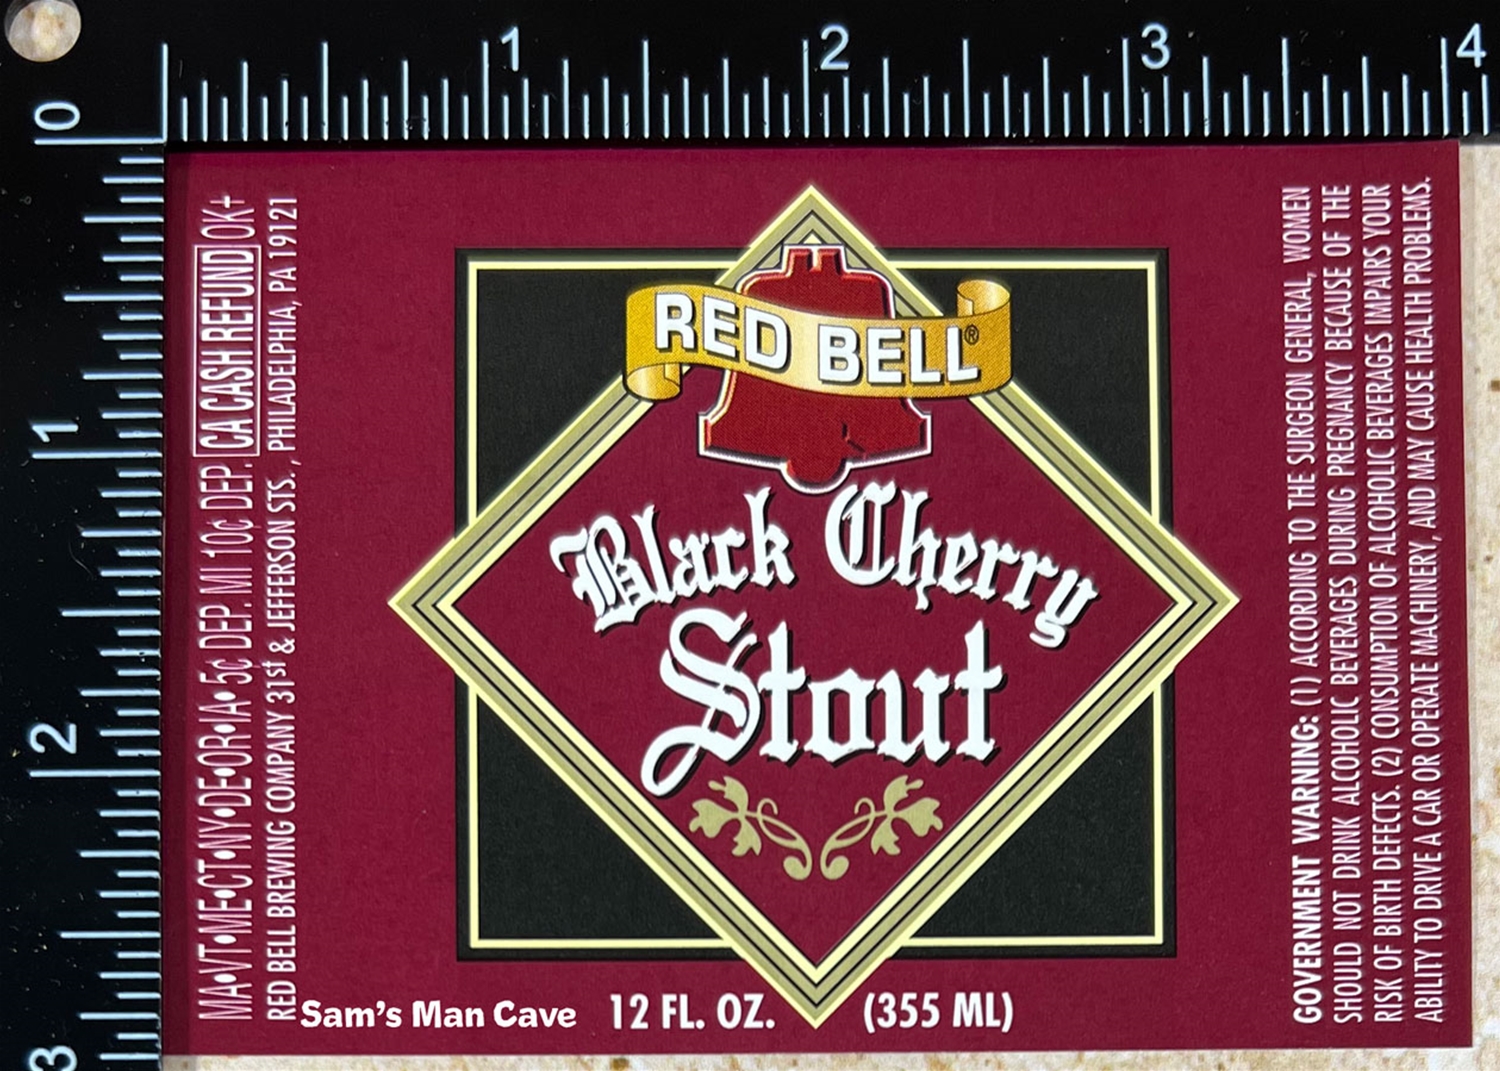 Red Bell Black Cherry Stout Beer Label